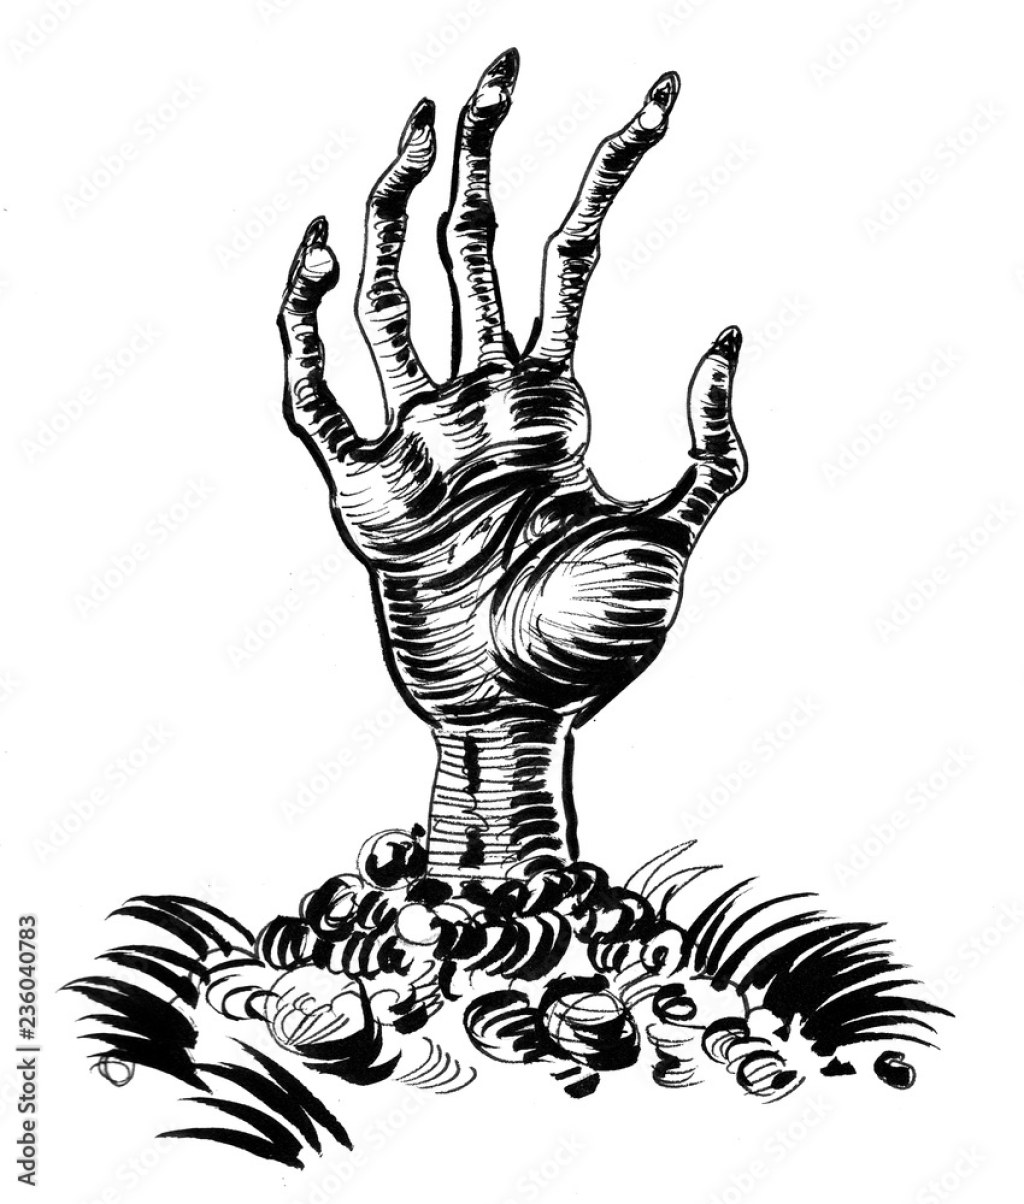 Picture of: Zombie hand sticking out of grave